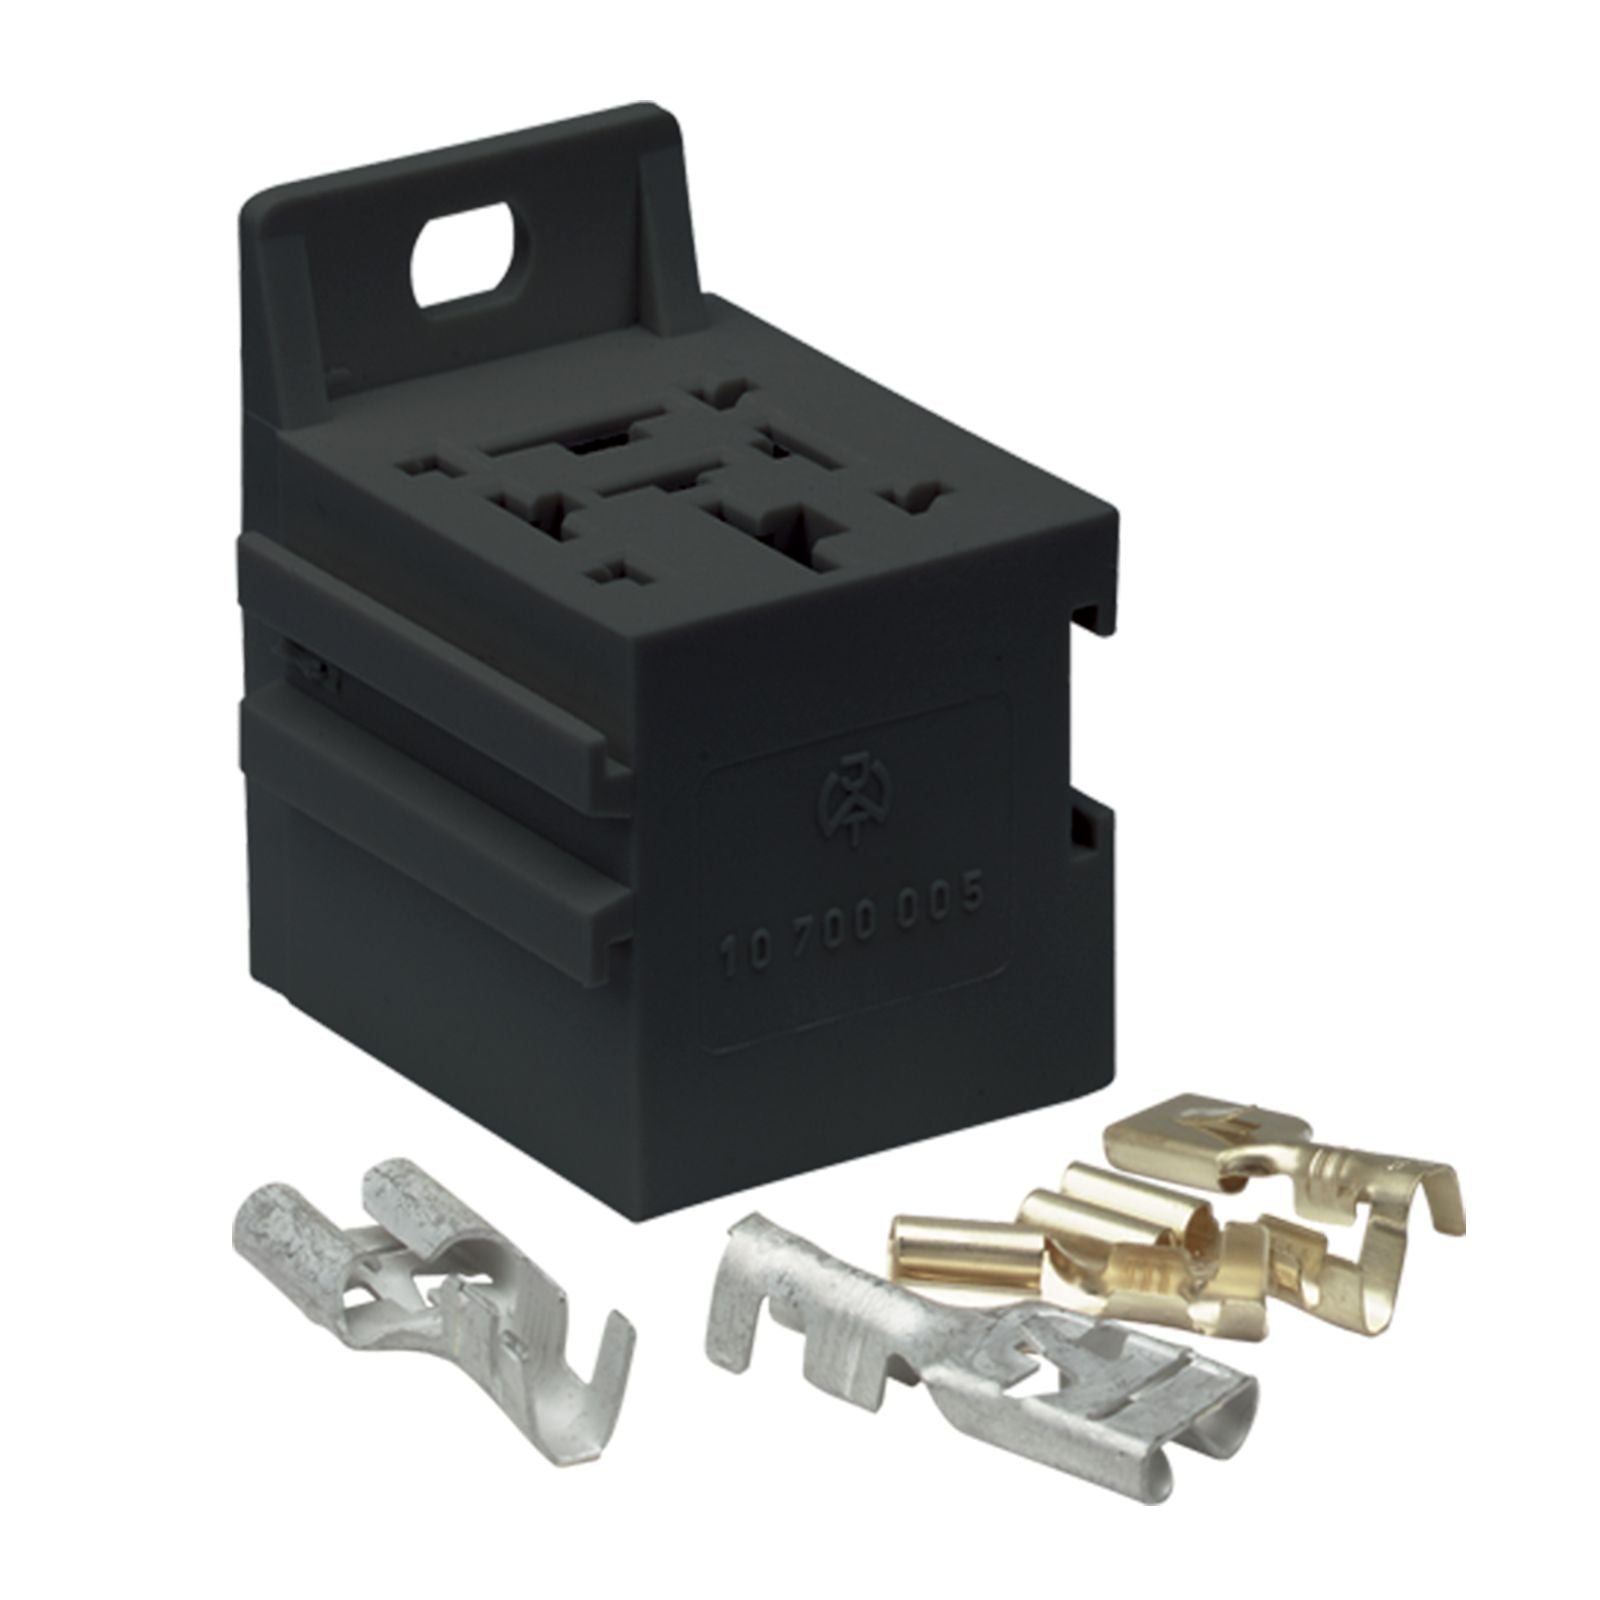 RELAY CONNECTORS SUITS 4 AND 5 PIN (BLISTER PACK OF 1)